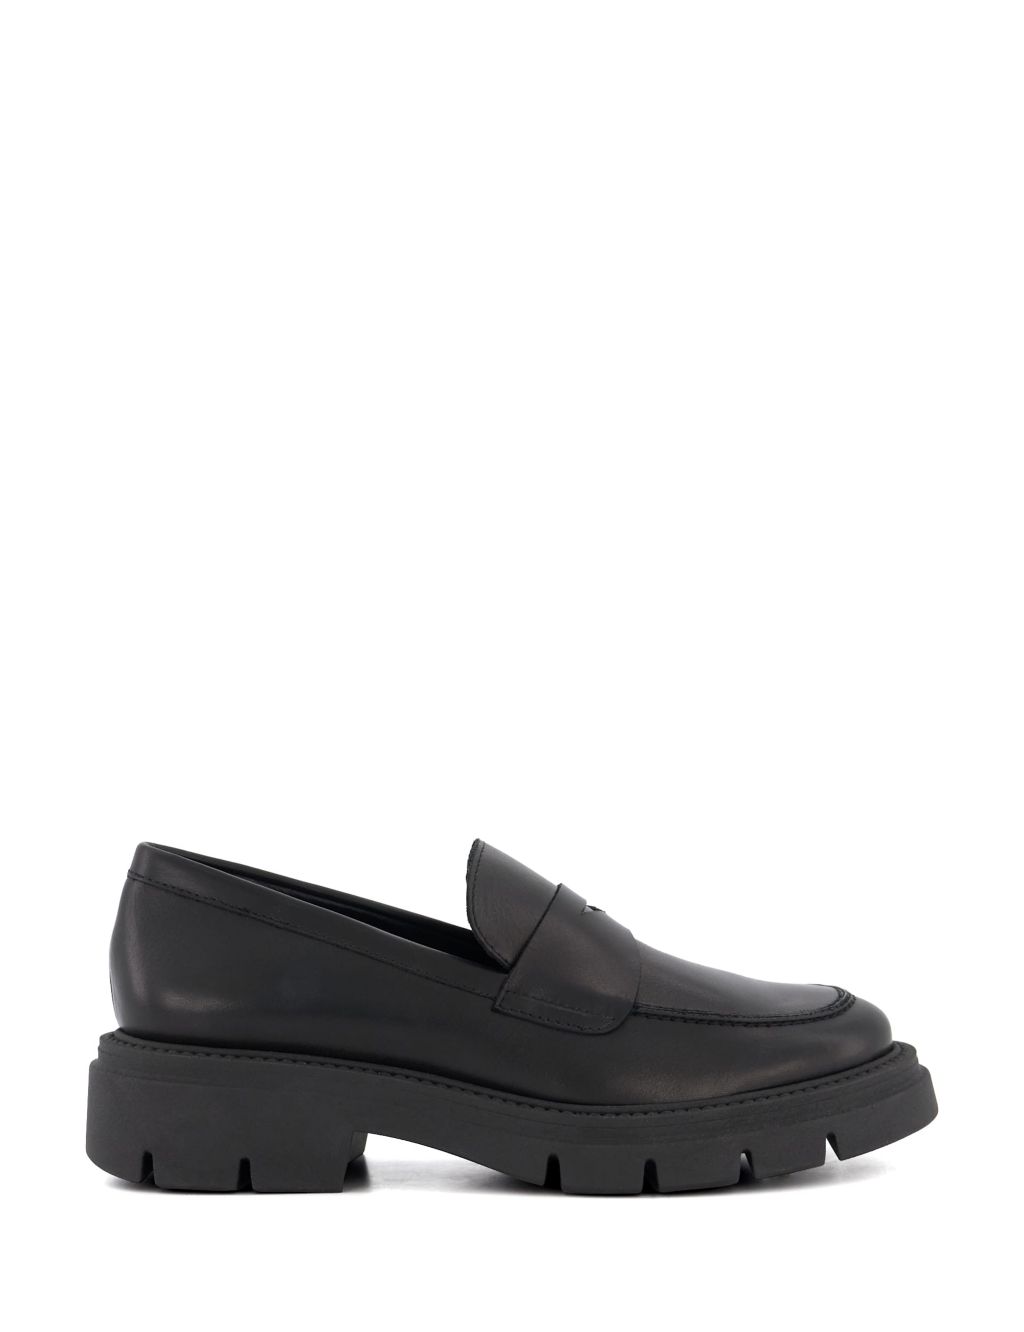 Leather Chunky Flat Loafers image 1